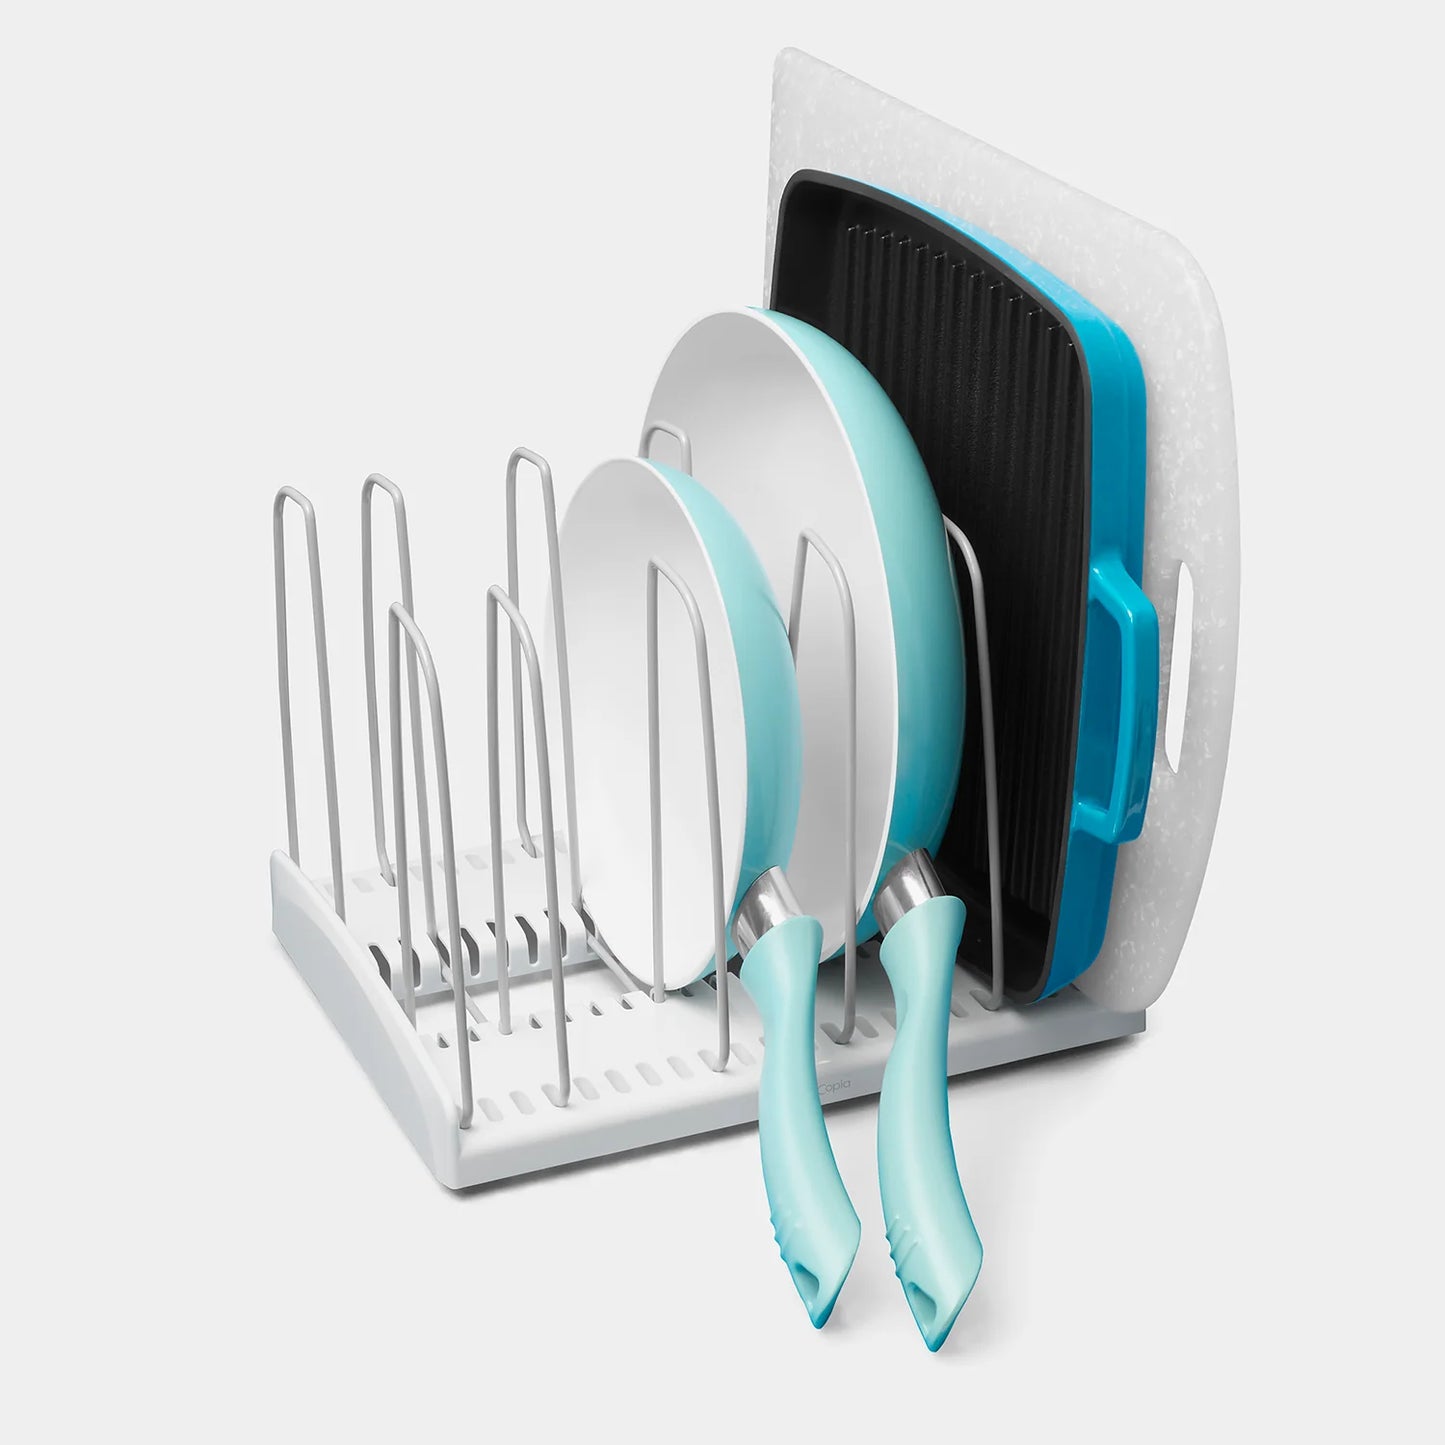 YouCopia's StoreMore® Cookware Rack